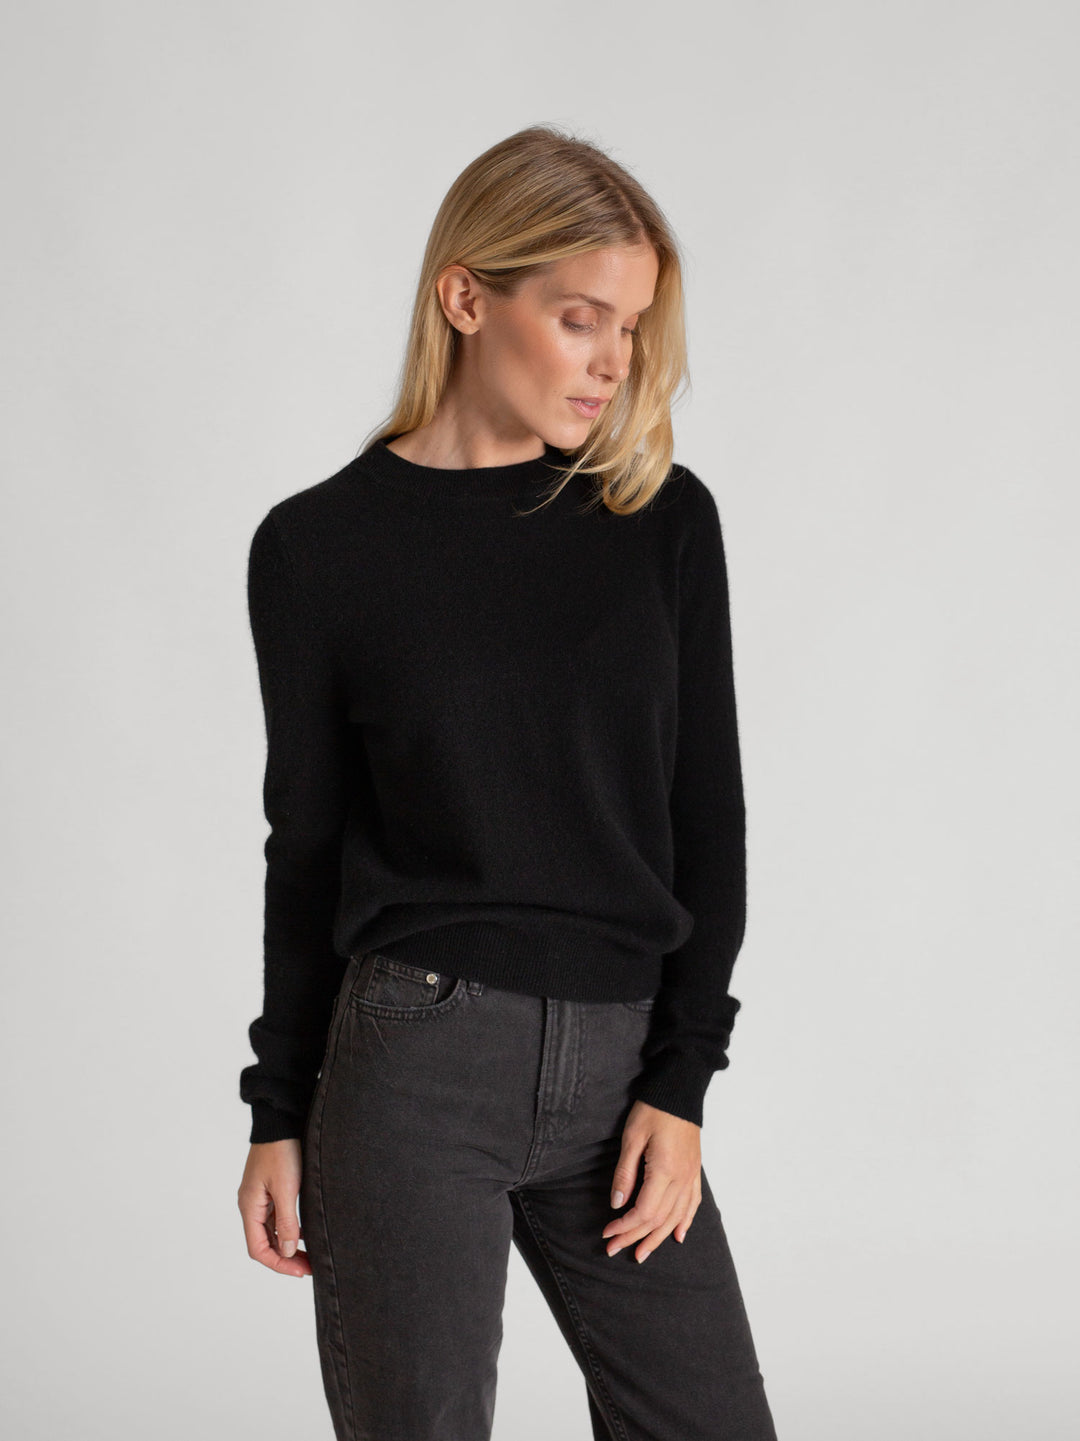 Cashmere sweater "Thora" in 100% pure cashmere. Long sleeves, round neck. Scandinavian design by Kashmina. Color: Black.